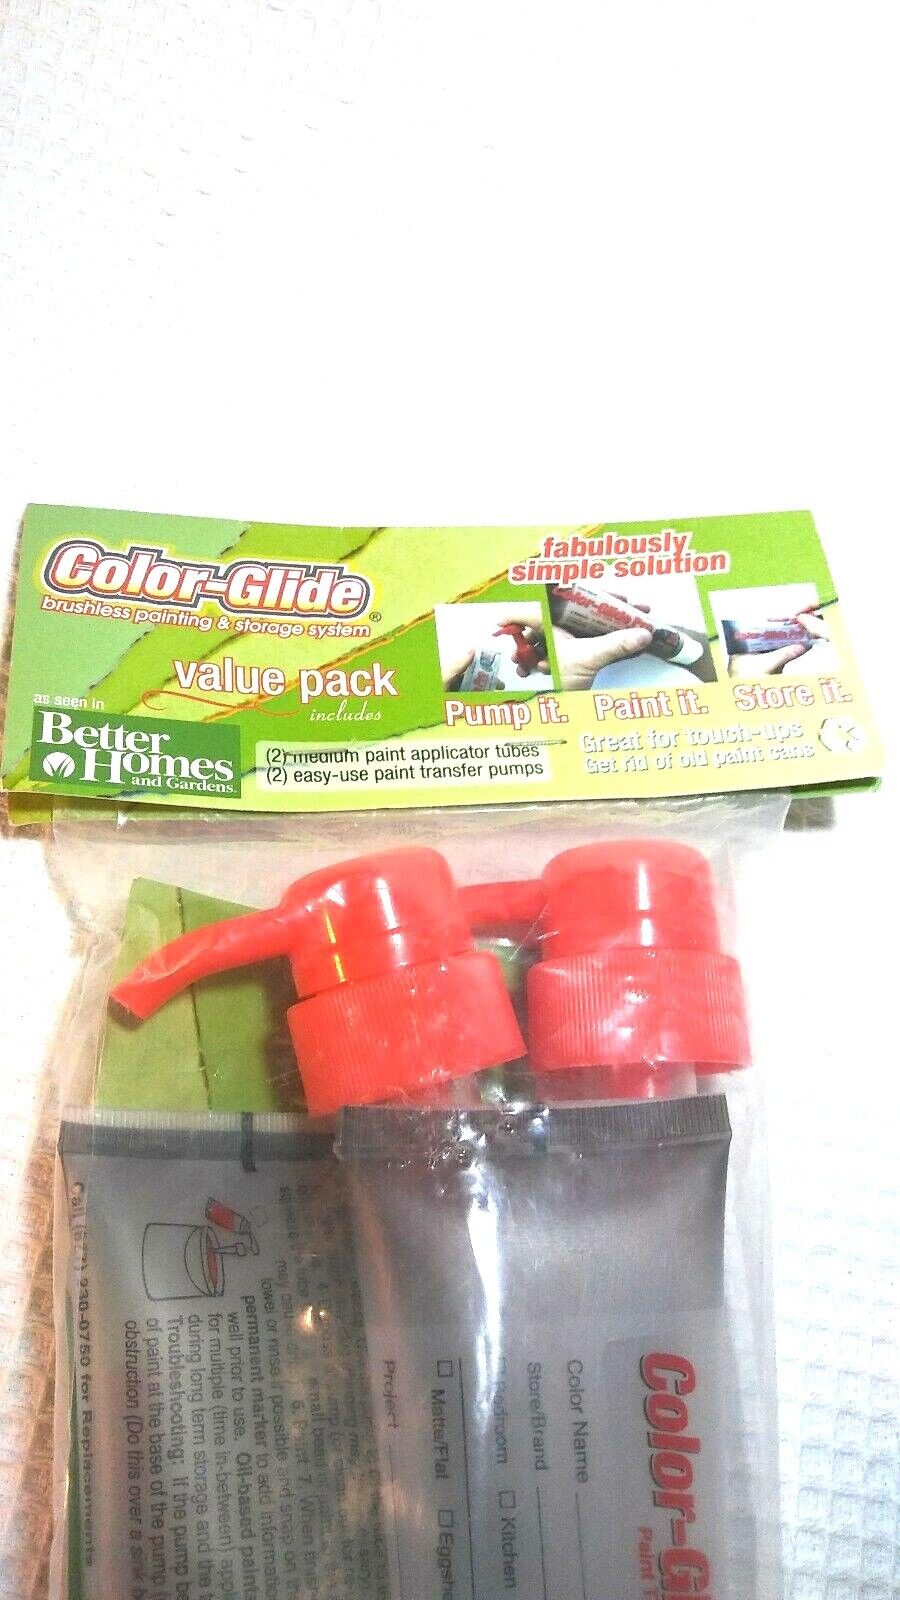 2 Packs! Better Homes Color Glide Brushless Painting And Storage Better Homes & Garden Does Not Apply - фотография #4